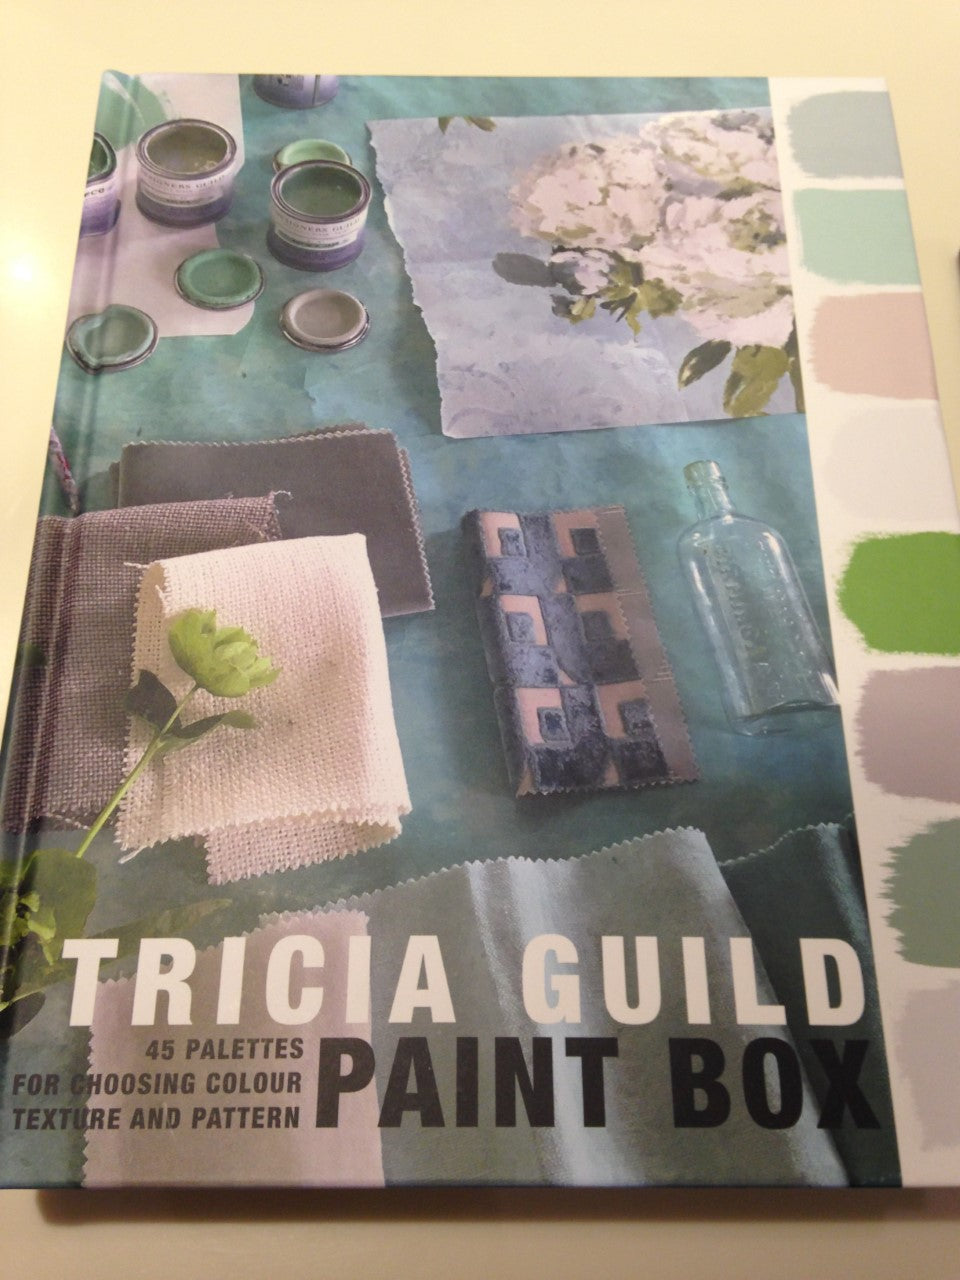 Tricia Guild Paint Box Book - Tilly and Tiffen 